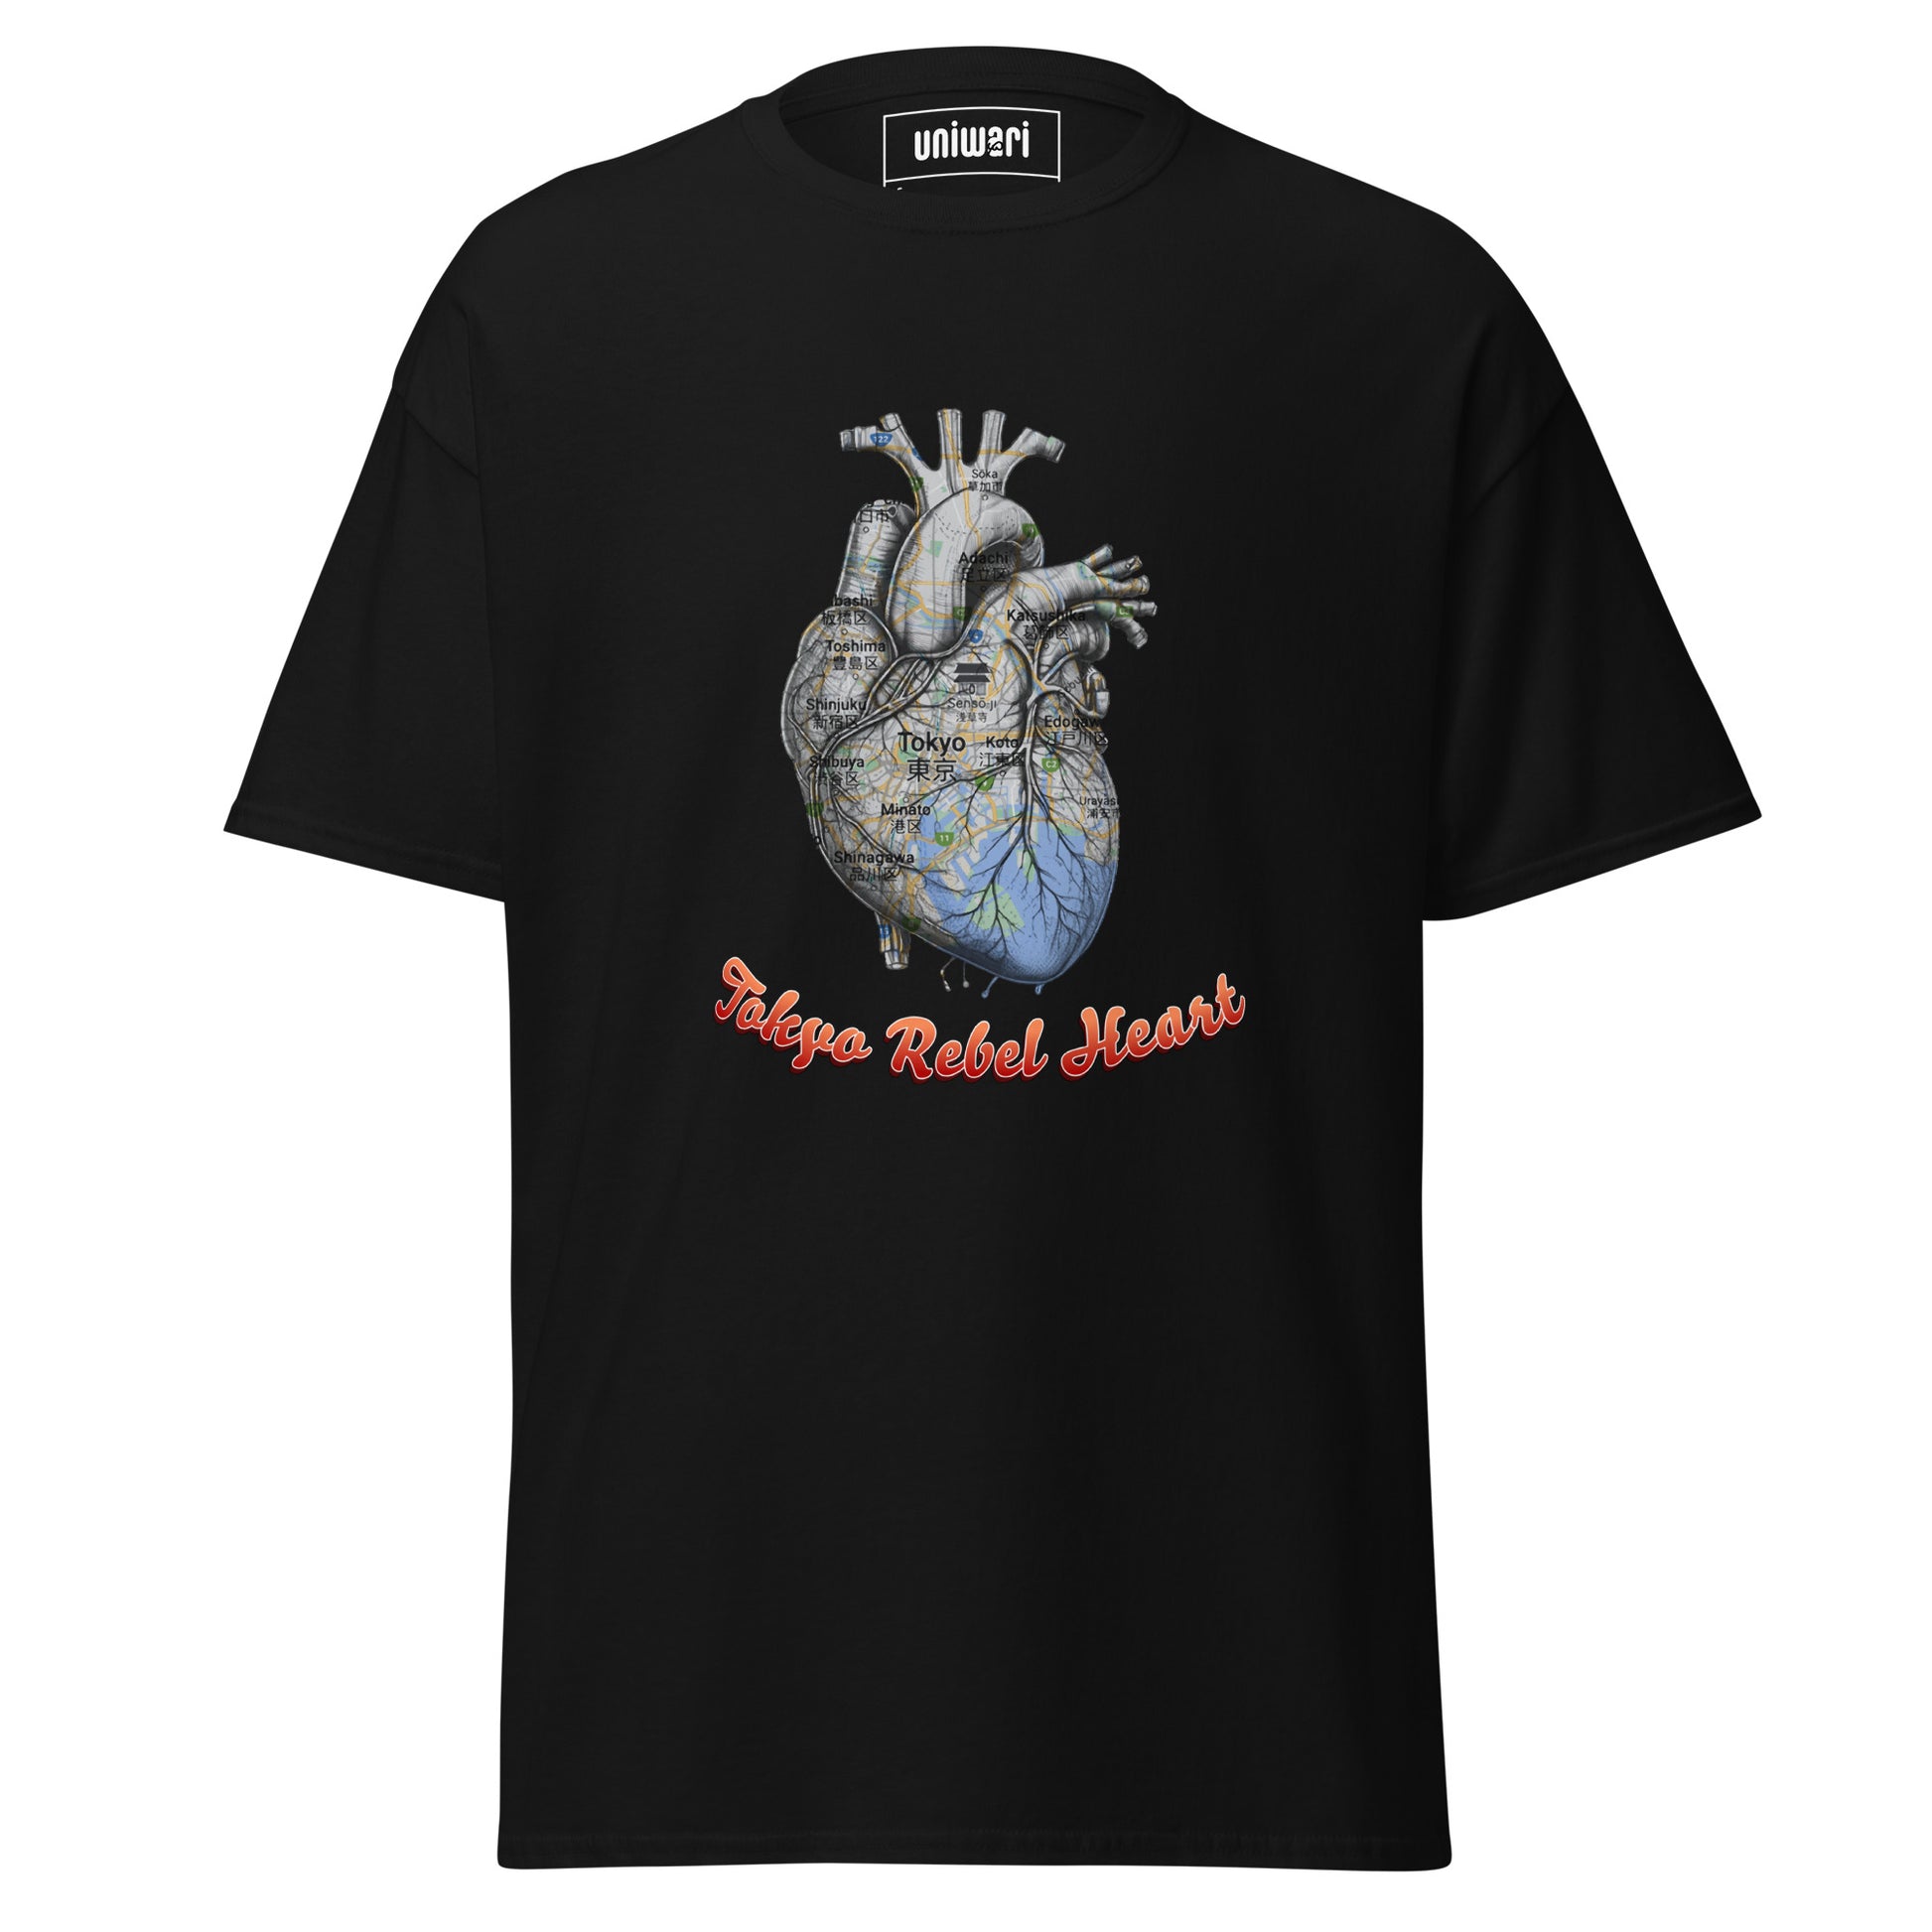 Black High Quality Tee - Front Design with a Heart Shaped Map of Tokyo and a Phrase "Tokyo Rebel Heart" print